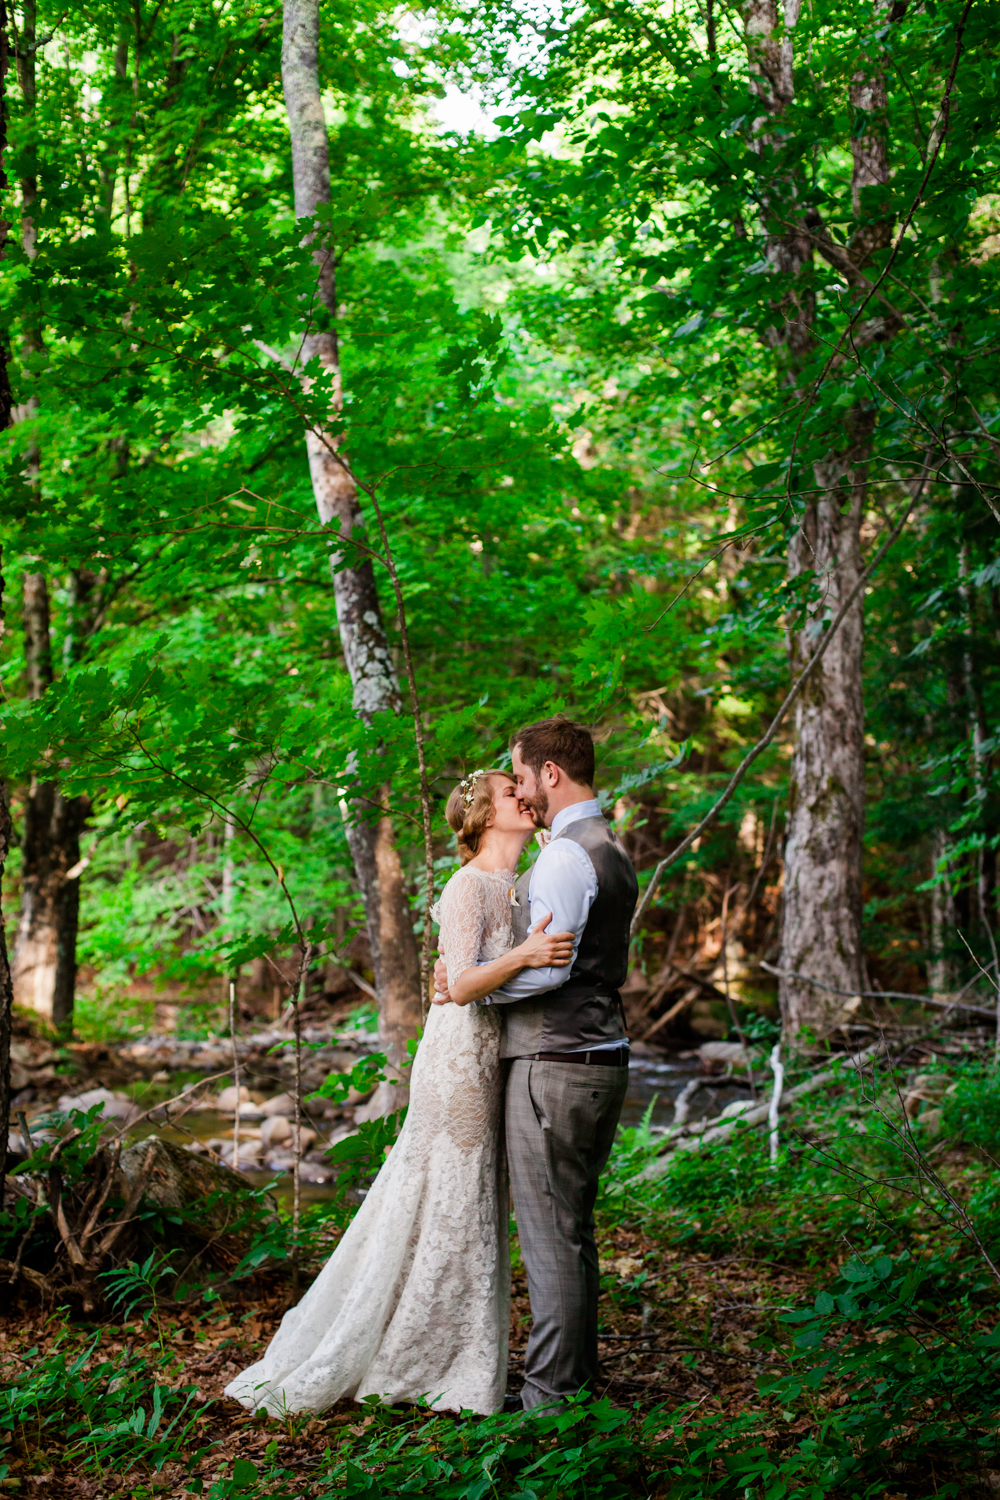  Bride and groom share a moment in the Adirondacks 